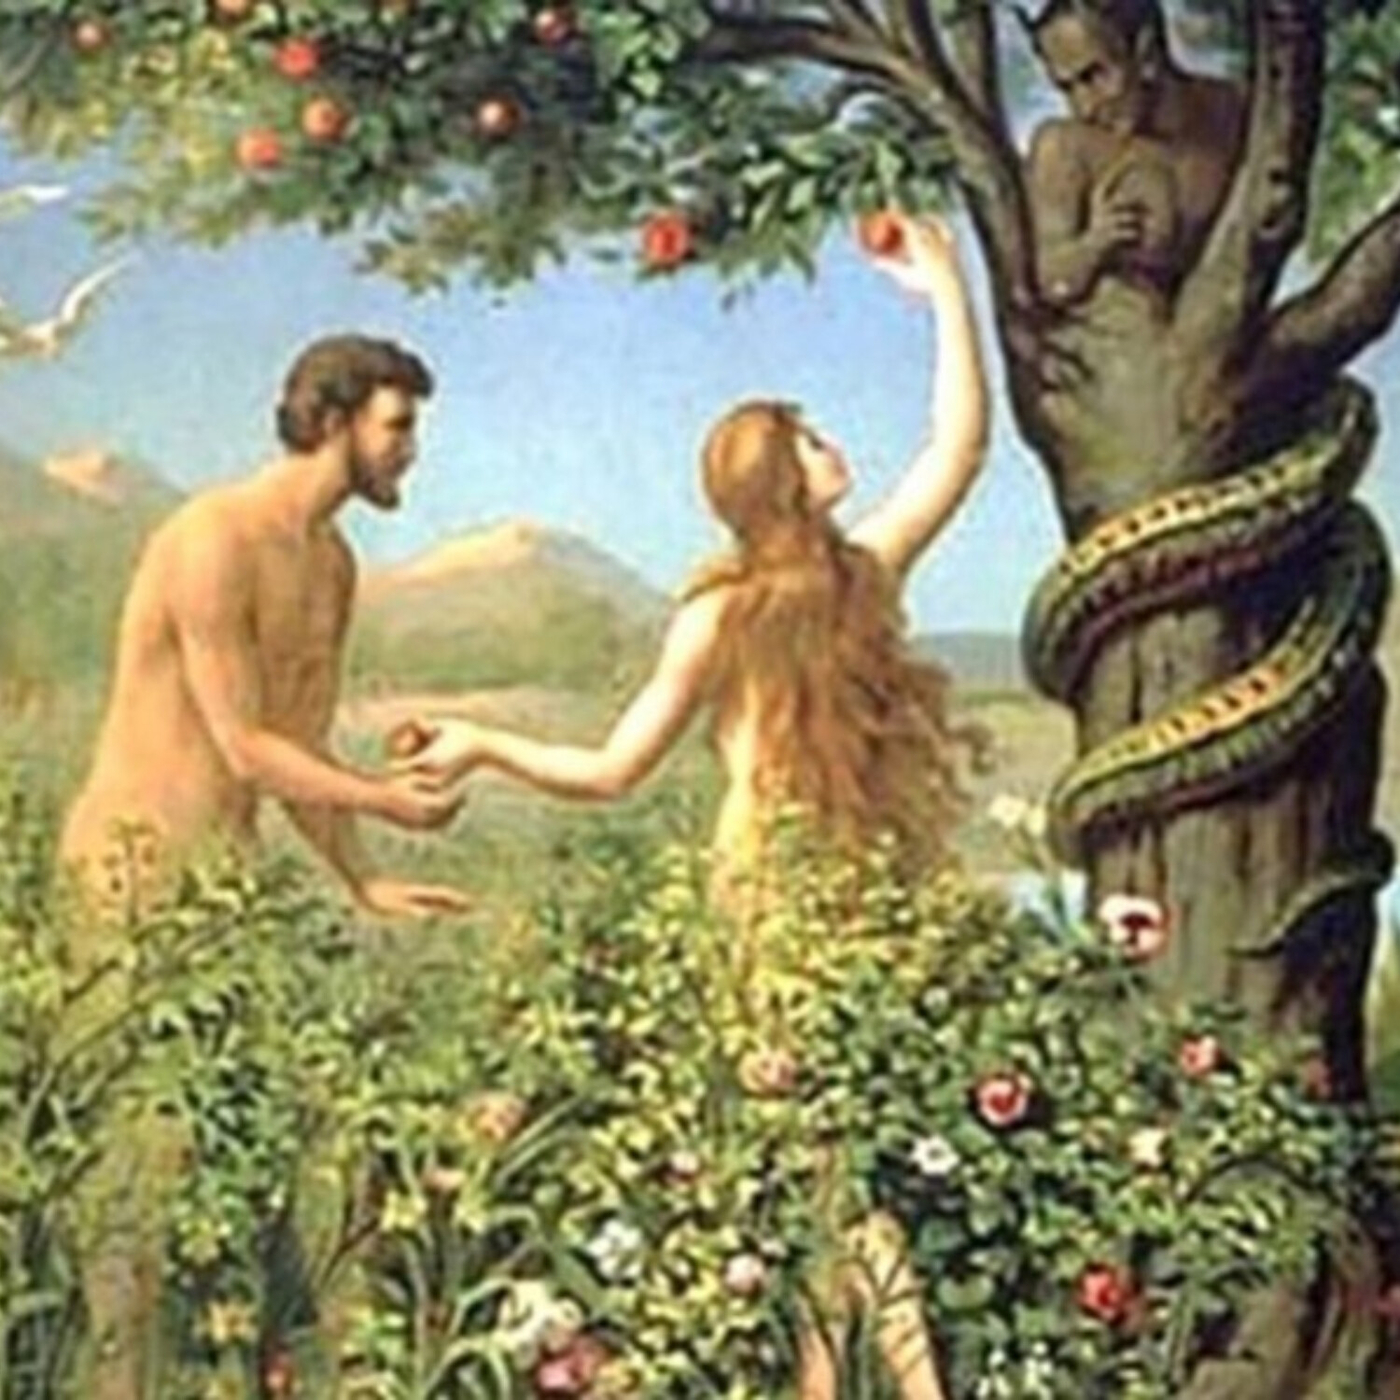 The Fall Of Adam And Eve - Catechism Corner - Podcast.co